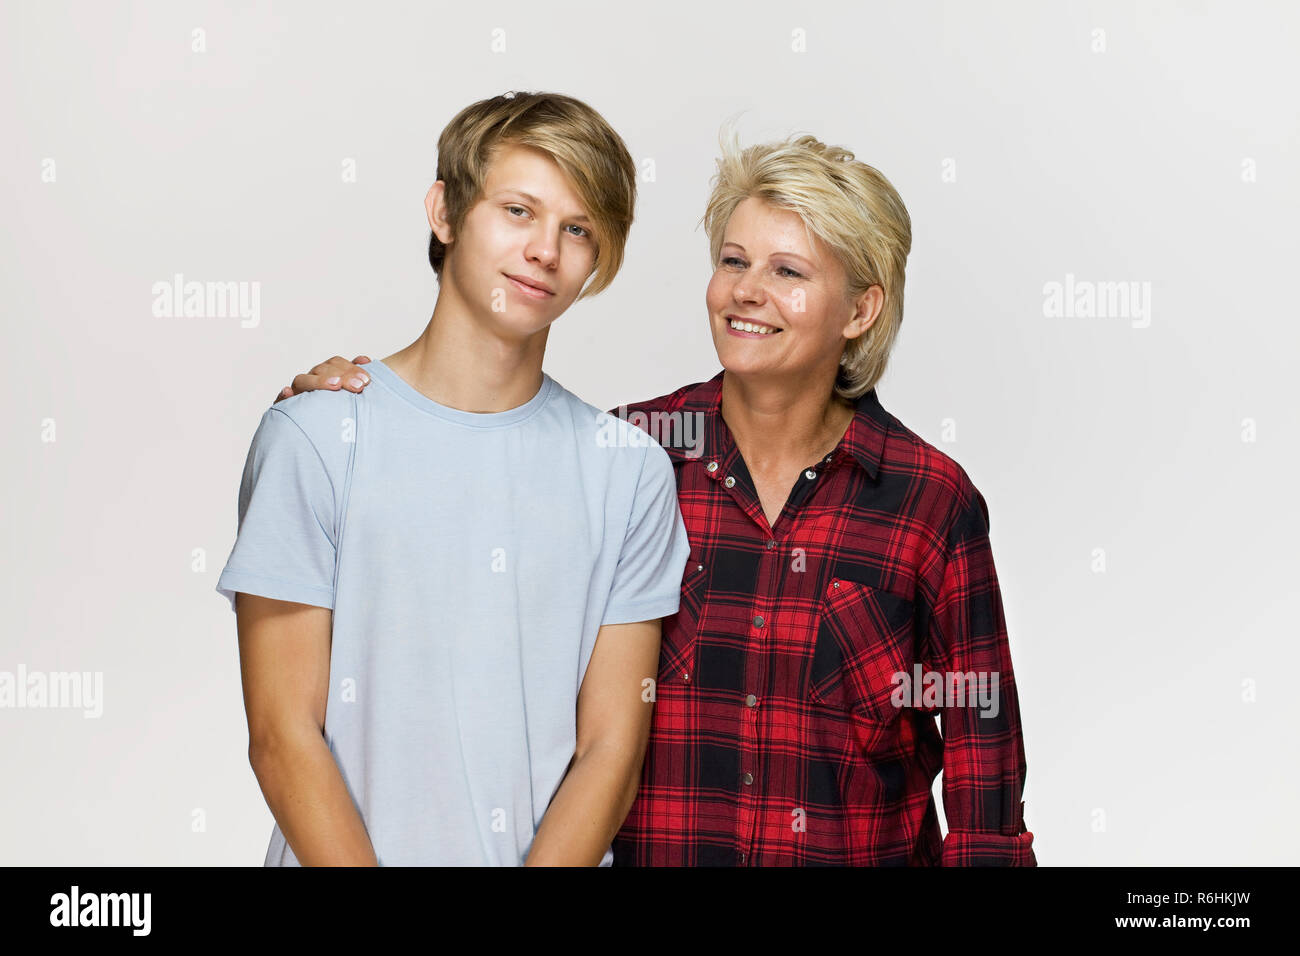 Family portrait. Smiling mother and son wearing casual clothing Stock Photo